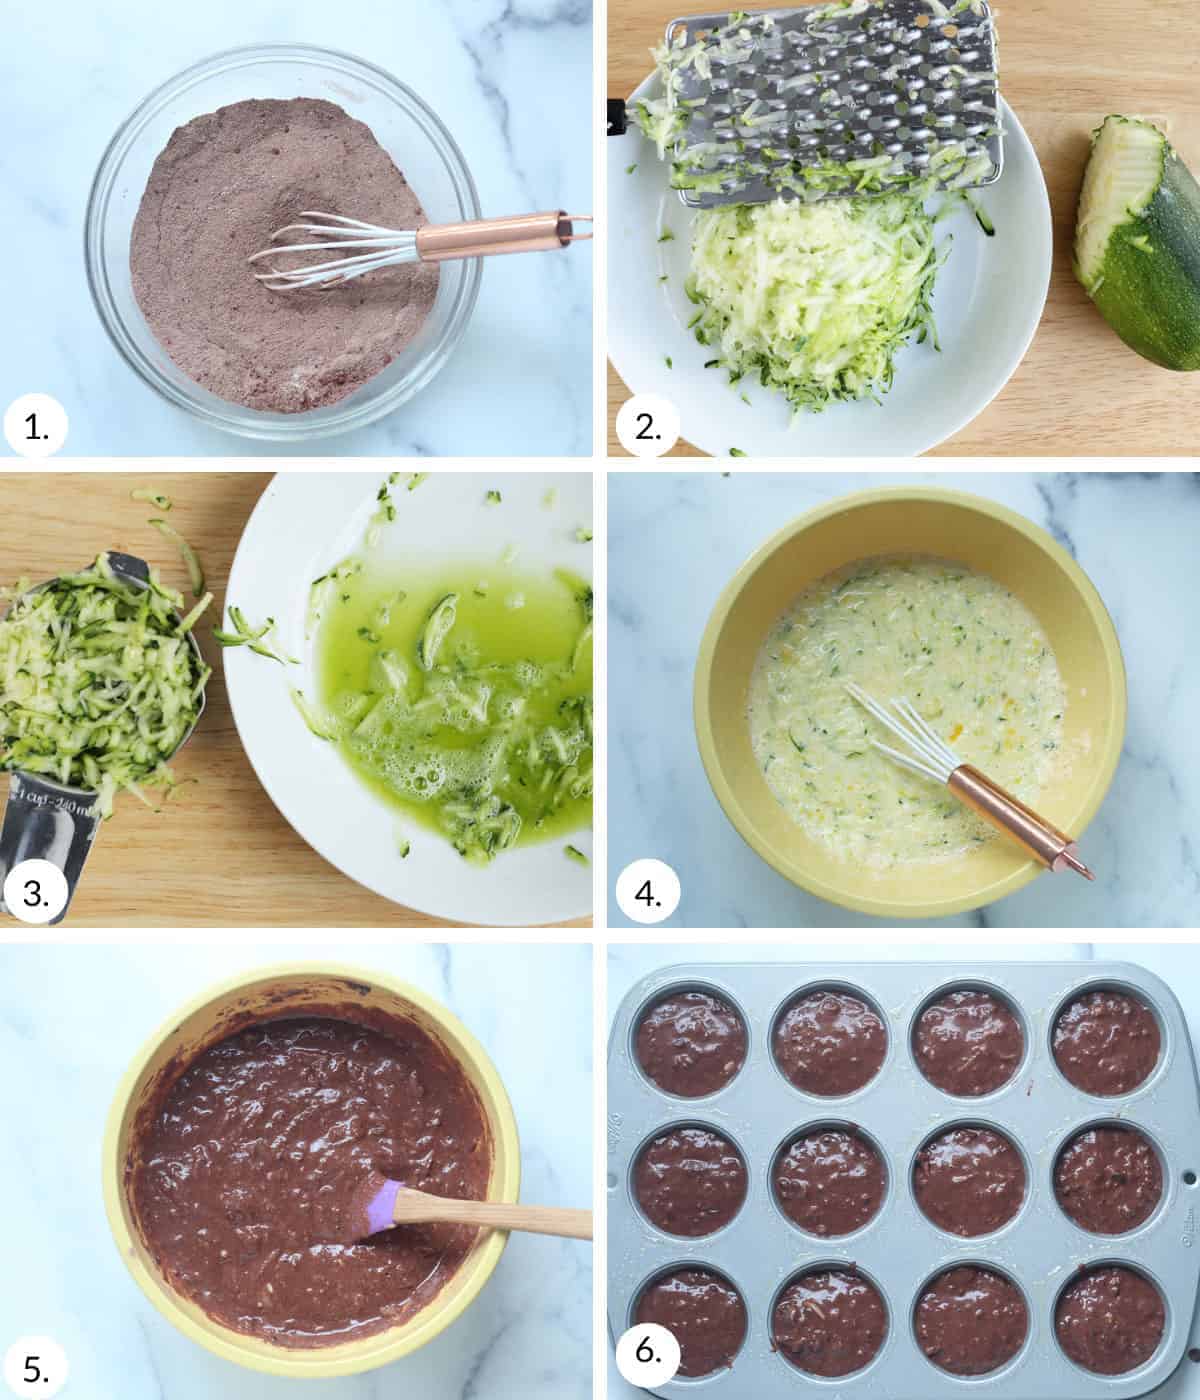 how to make chocolate chip zucchini muffins step-by-step